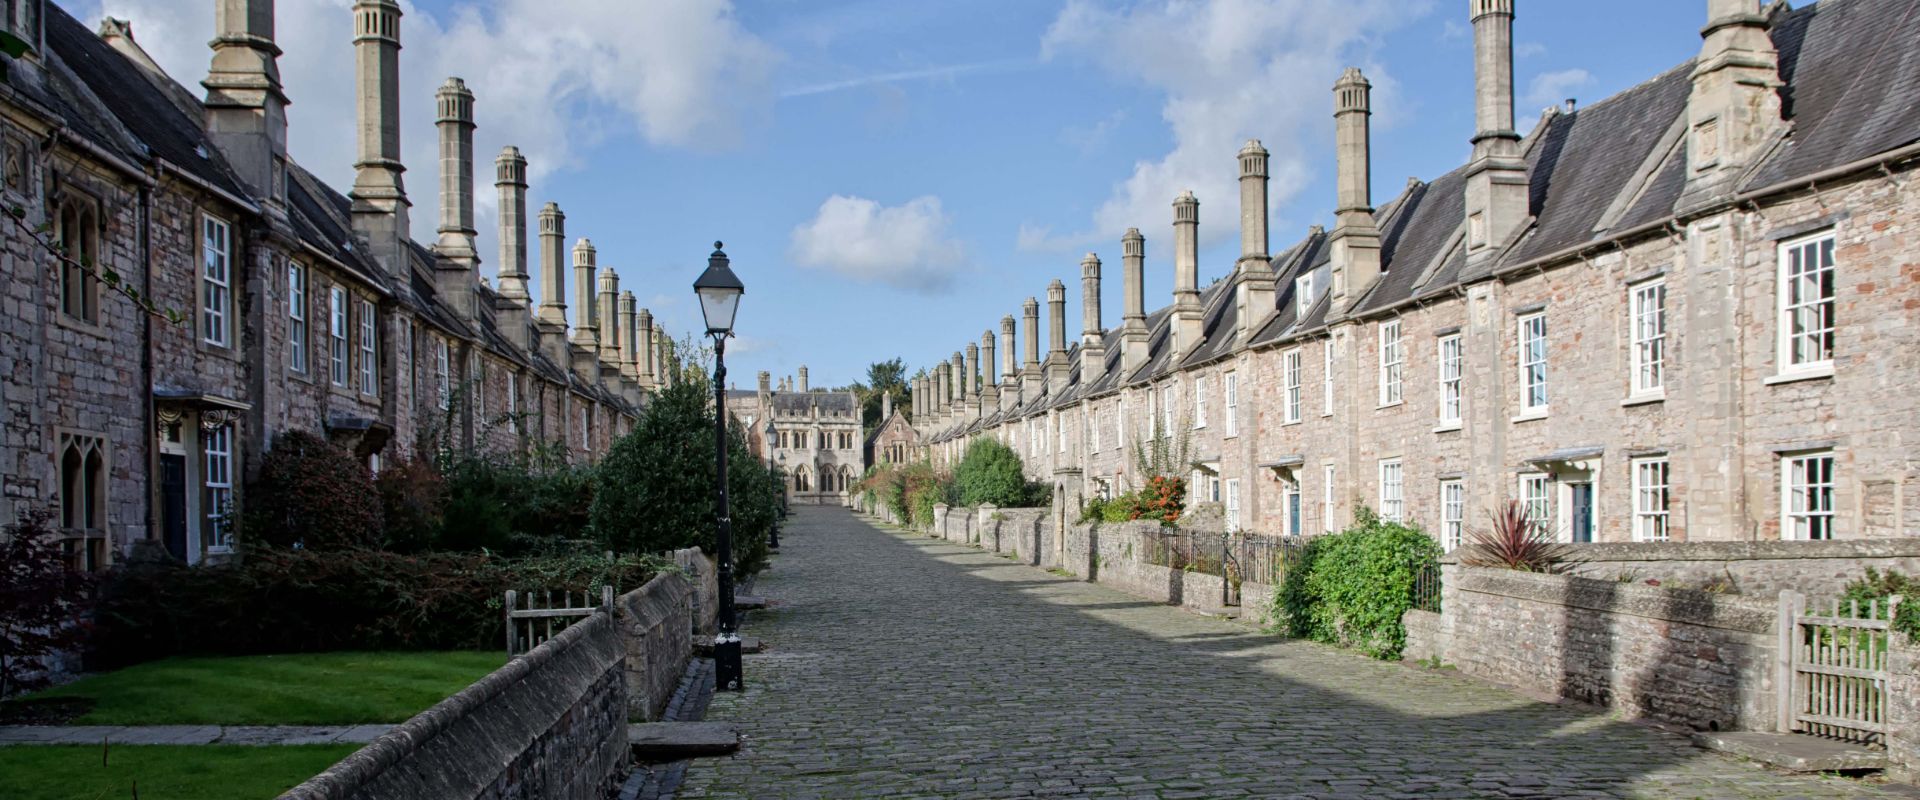 The Vicar's Close in the city of Wells